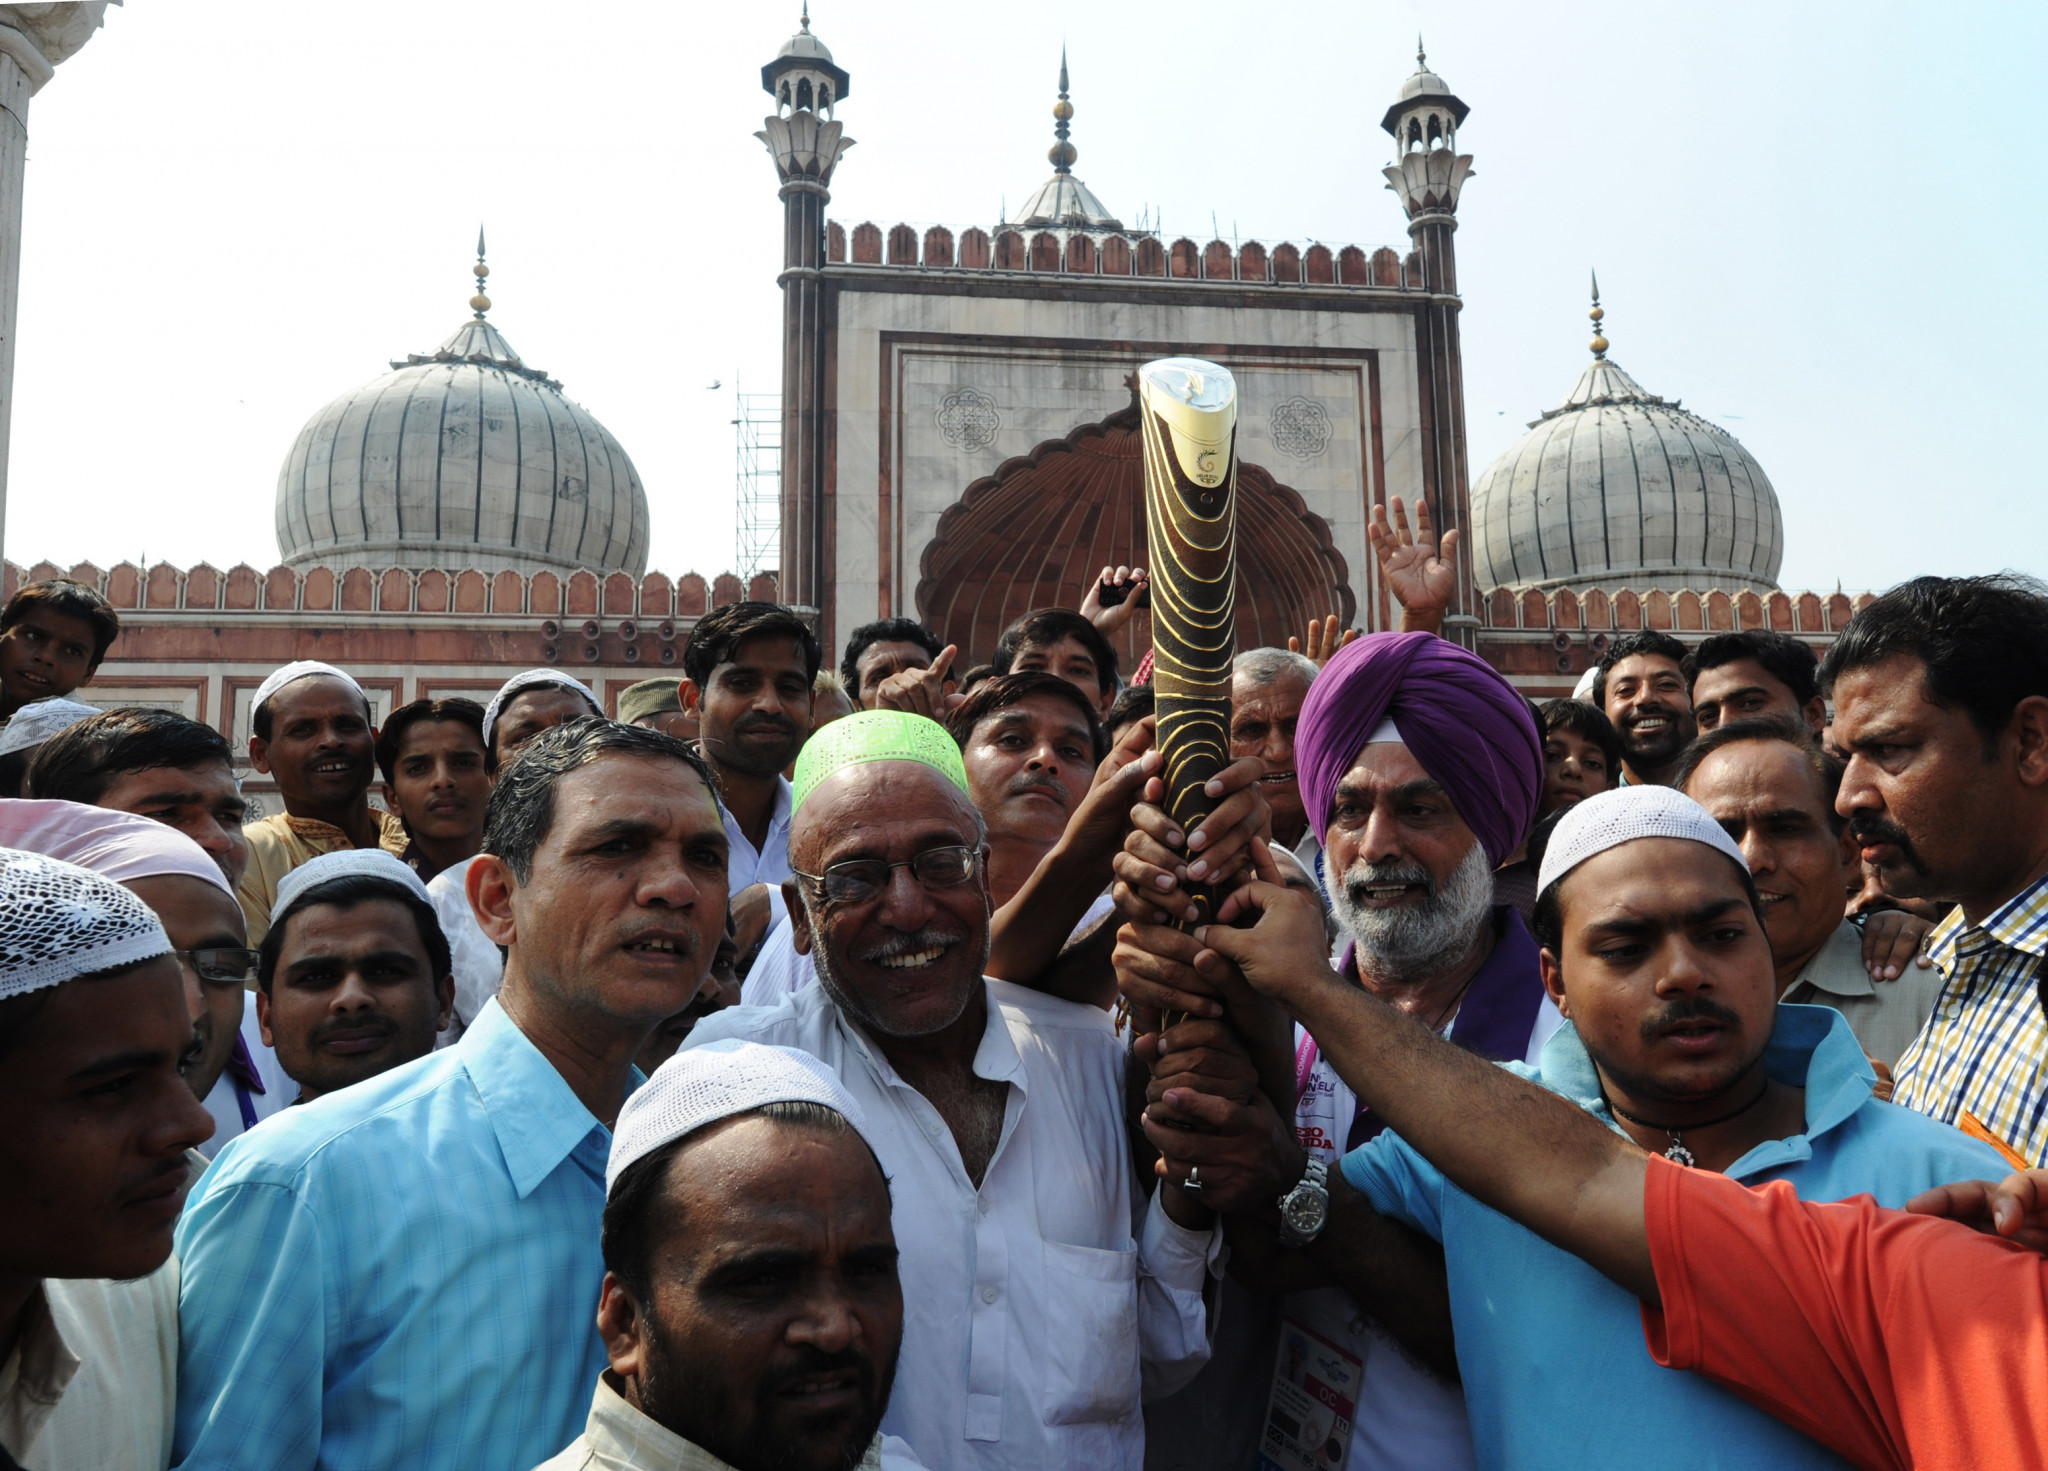 The Queen's Baton arrives at the Jama Masjid Mosque in New Delhi ©Getty Images